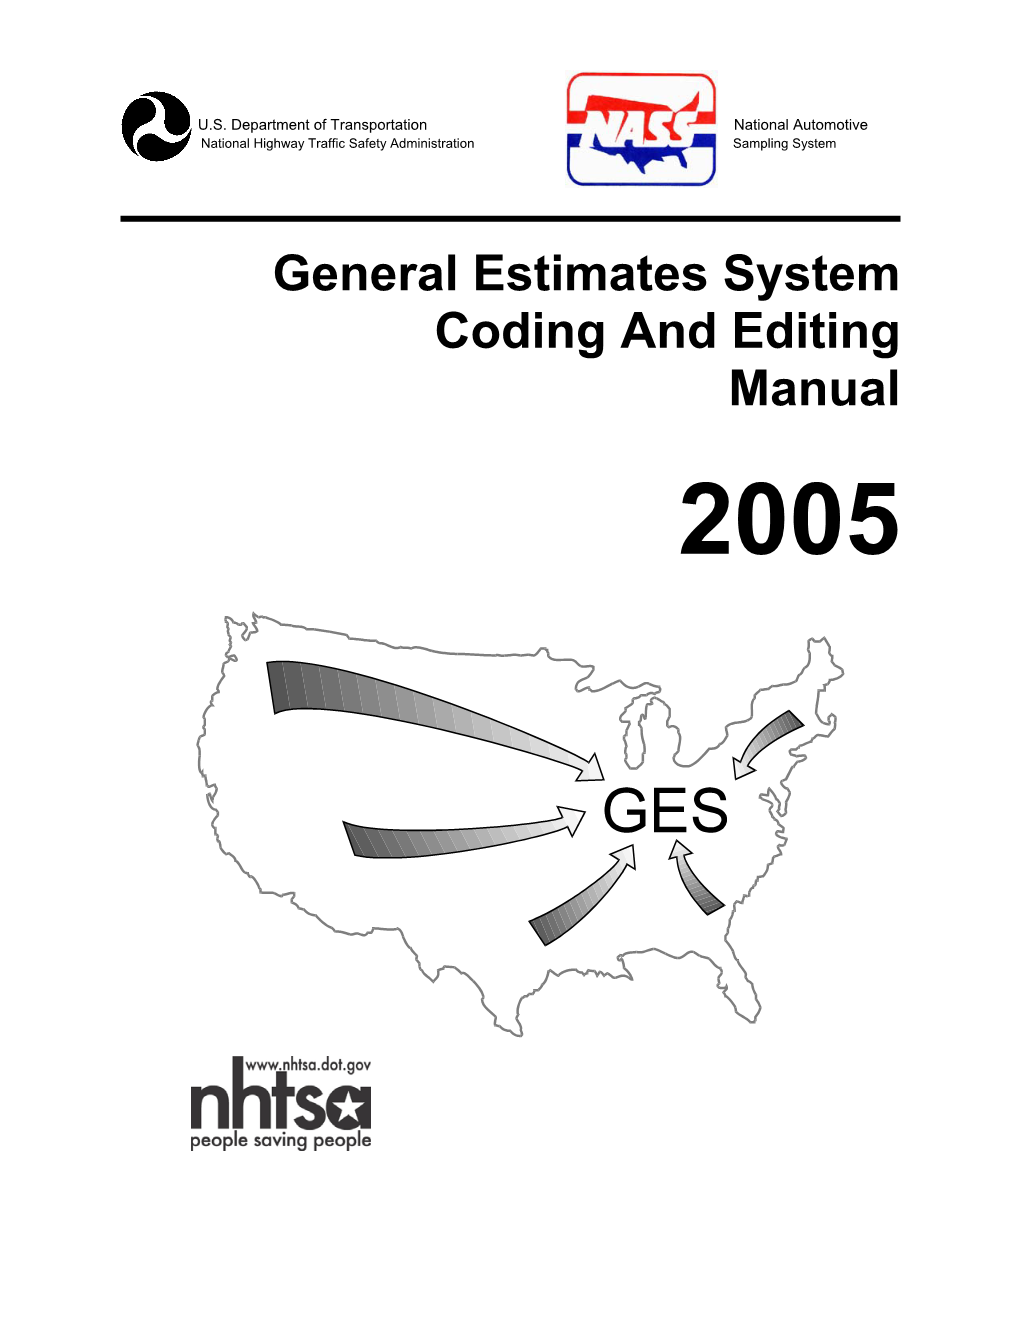 General Estimates System Coding and Editing Manual 2005